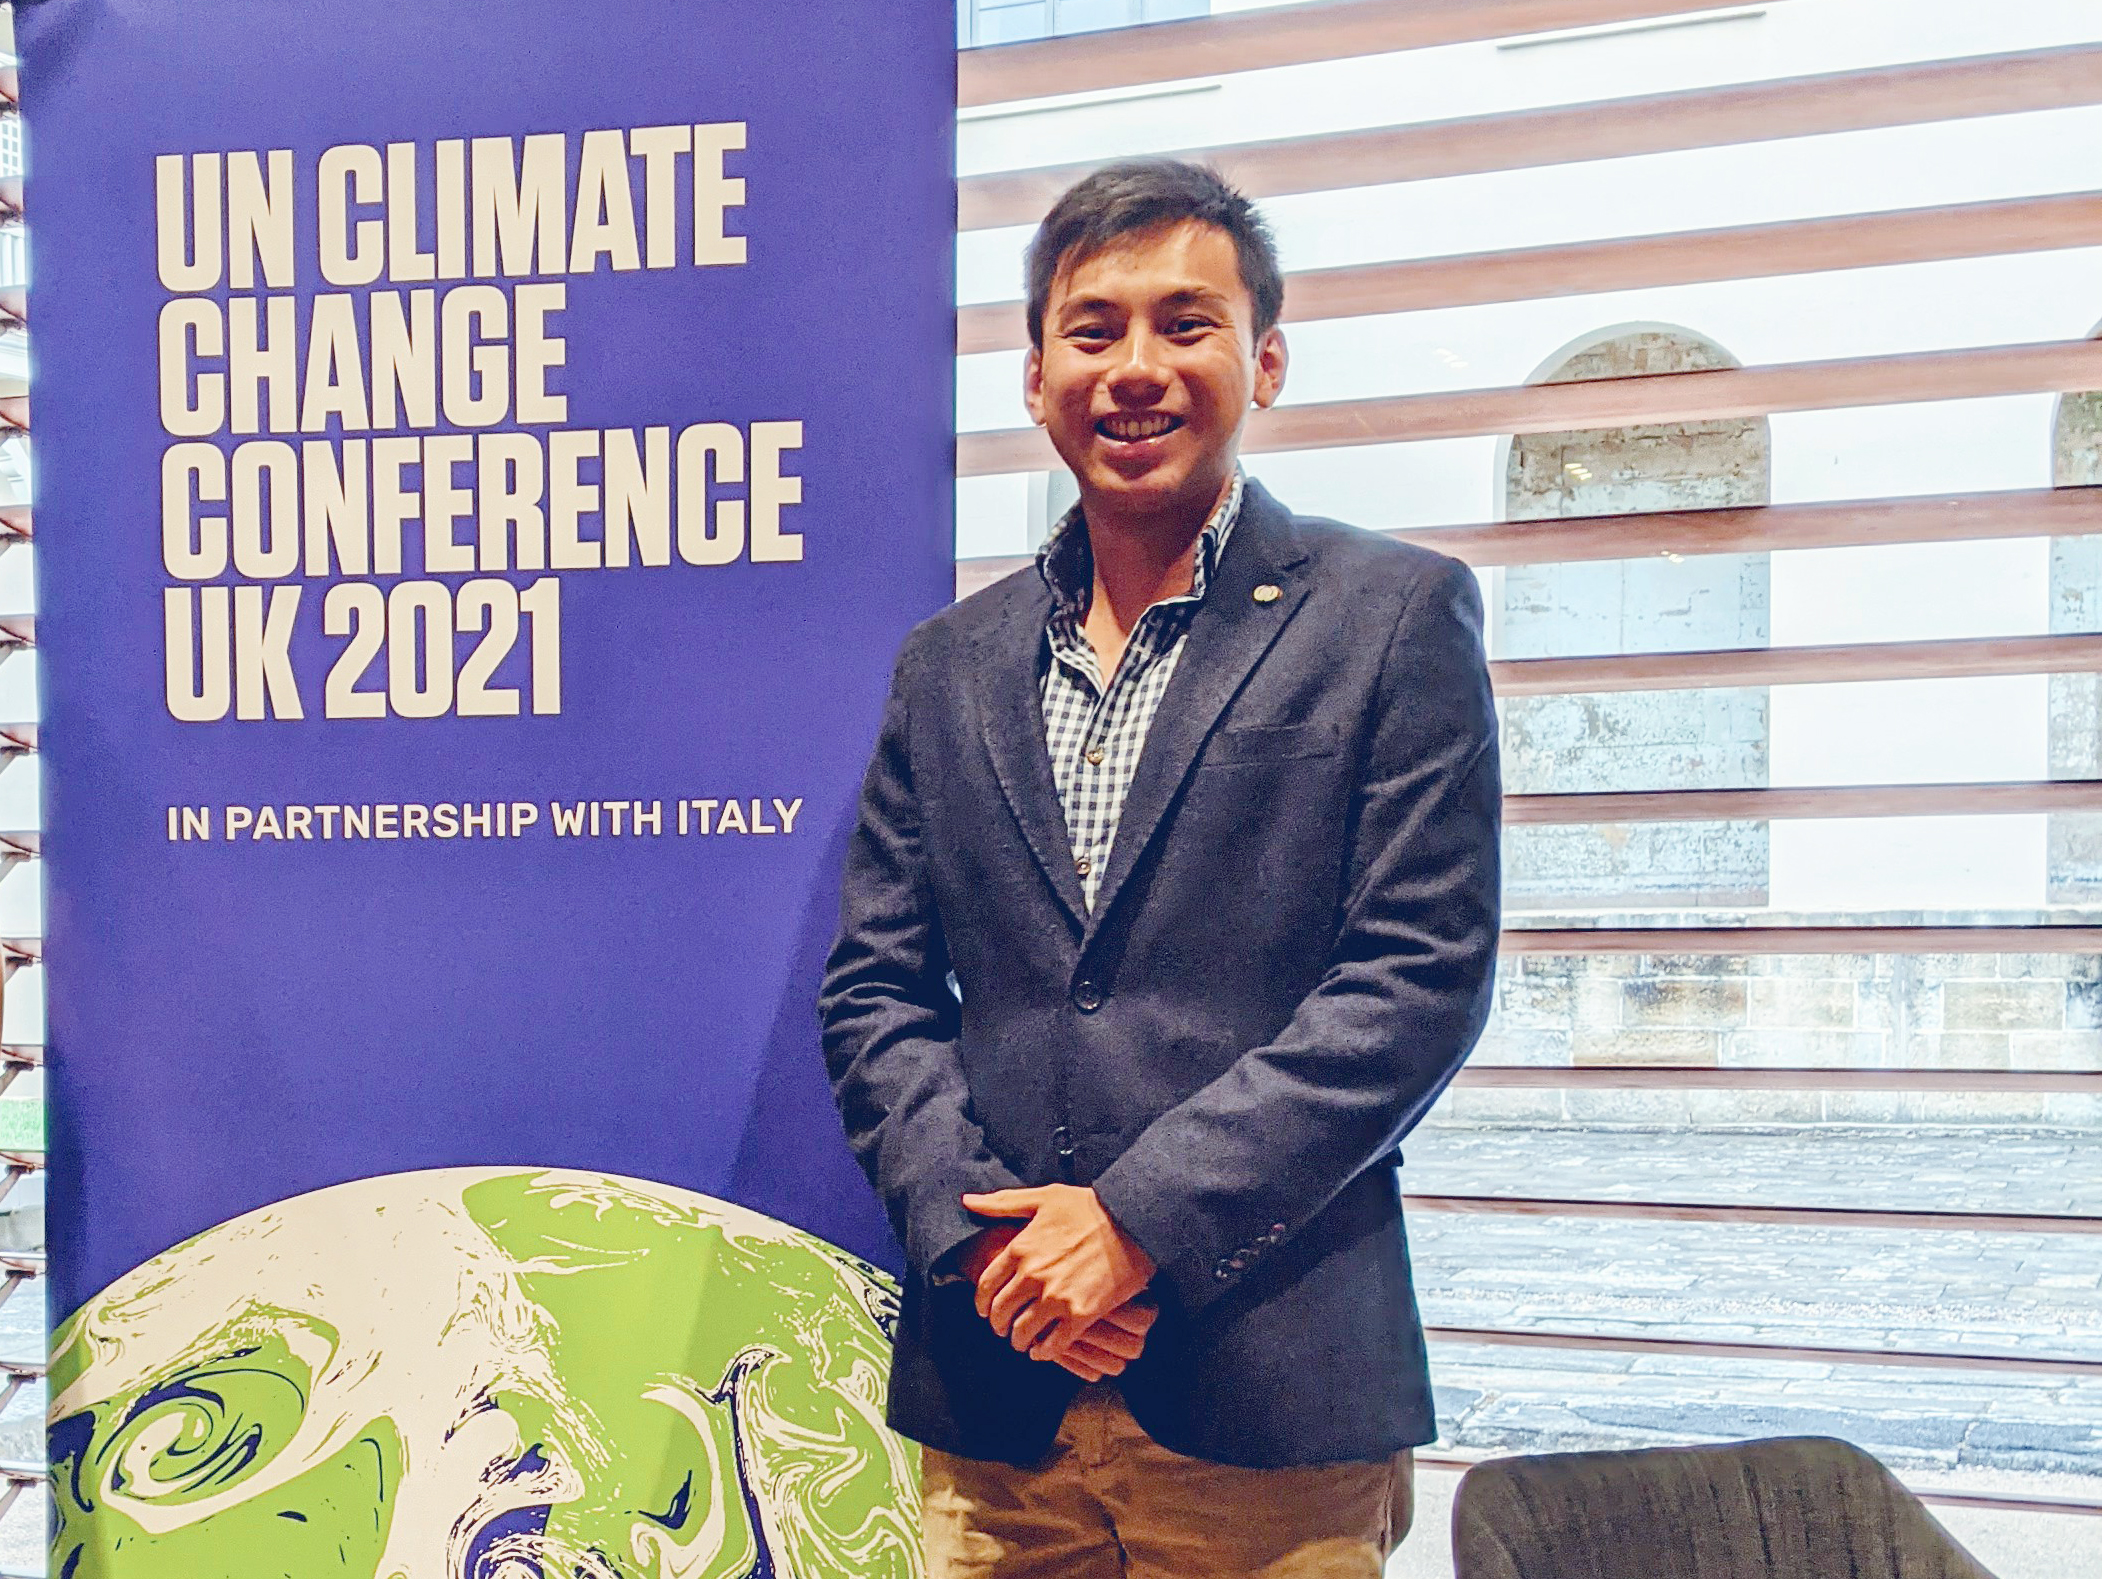 Local Sydney sustainability advocate calls for greater action on climate change at COP26